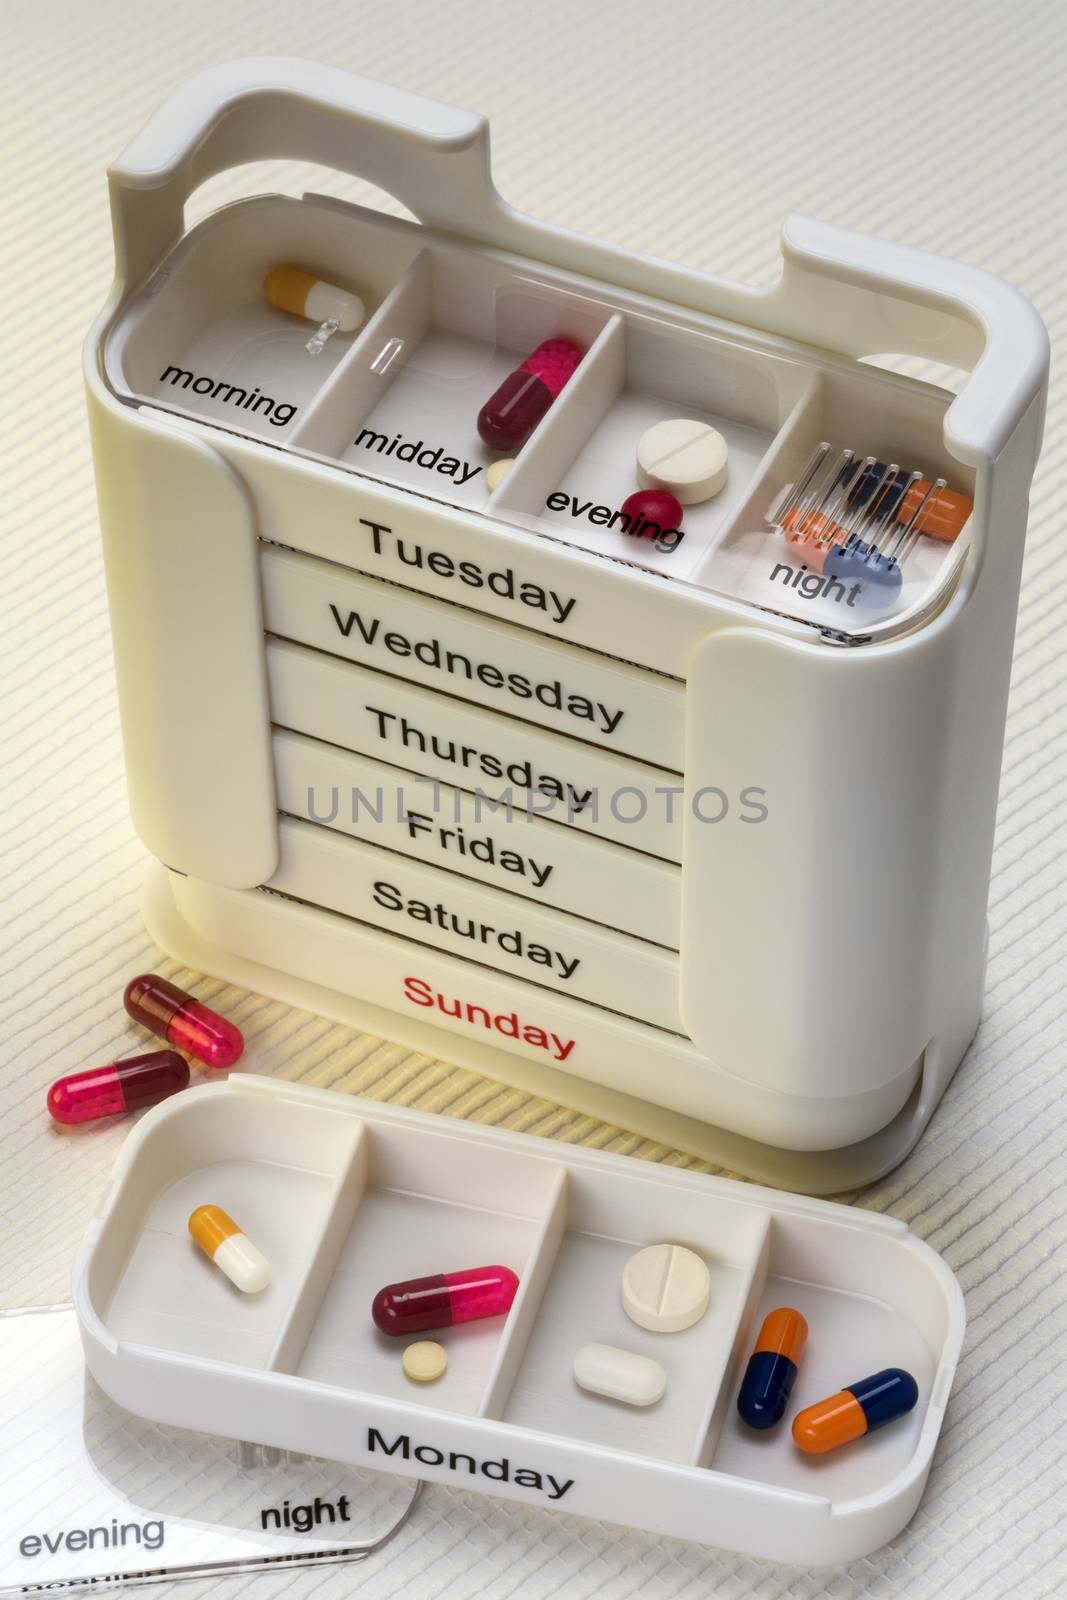 Medical Treatment - Daily drugs to be taken in the morning, midday, evening and at night.